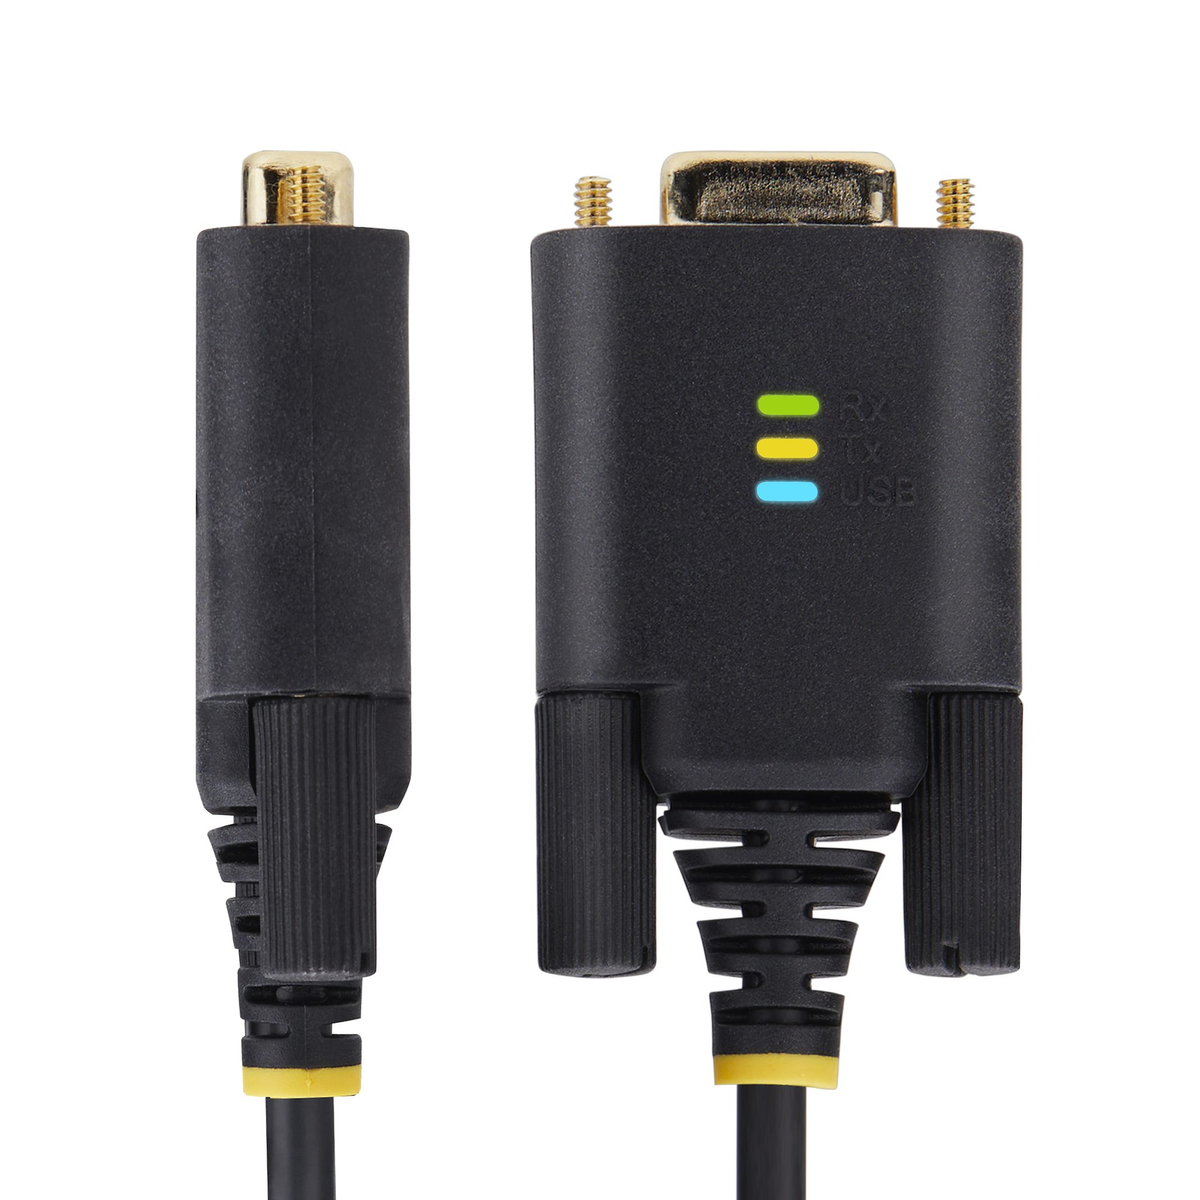 13ft 2-Port USB to RS232 Serial Adapter